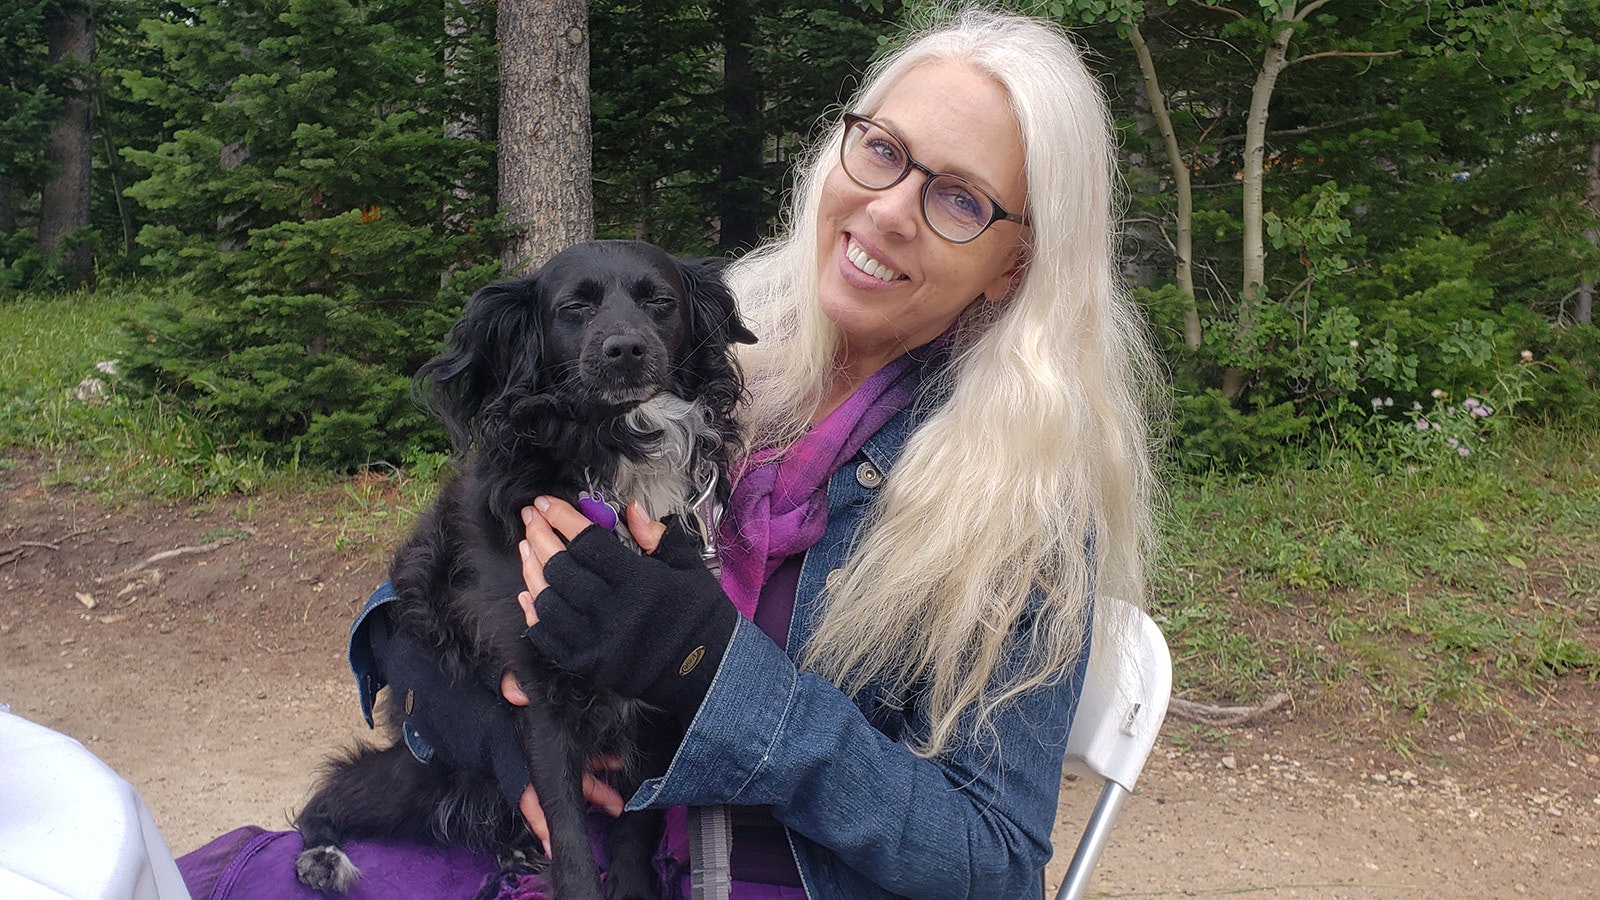 Laurie Rigg, a New Jersey transplant in Wyoming, is a mobile notary public and loan signing agent who recently moved to Wyoming with Riley, a Dutch tulip hound, or markiesje.